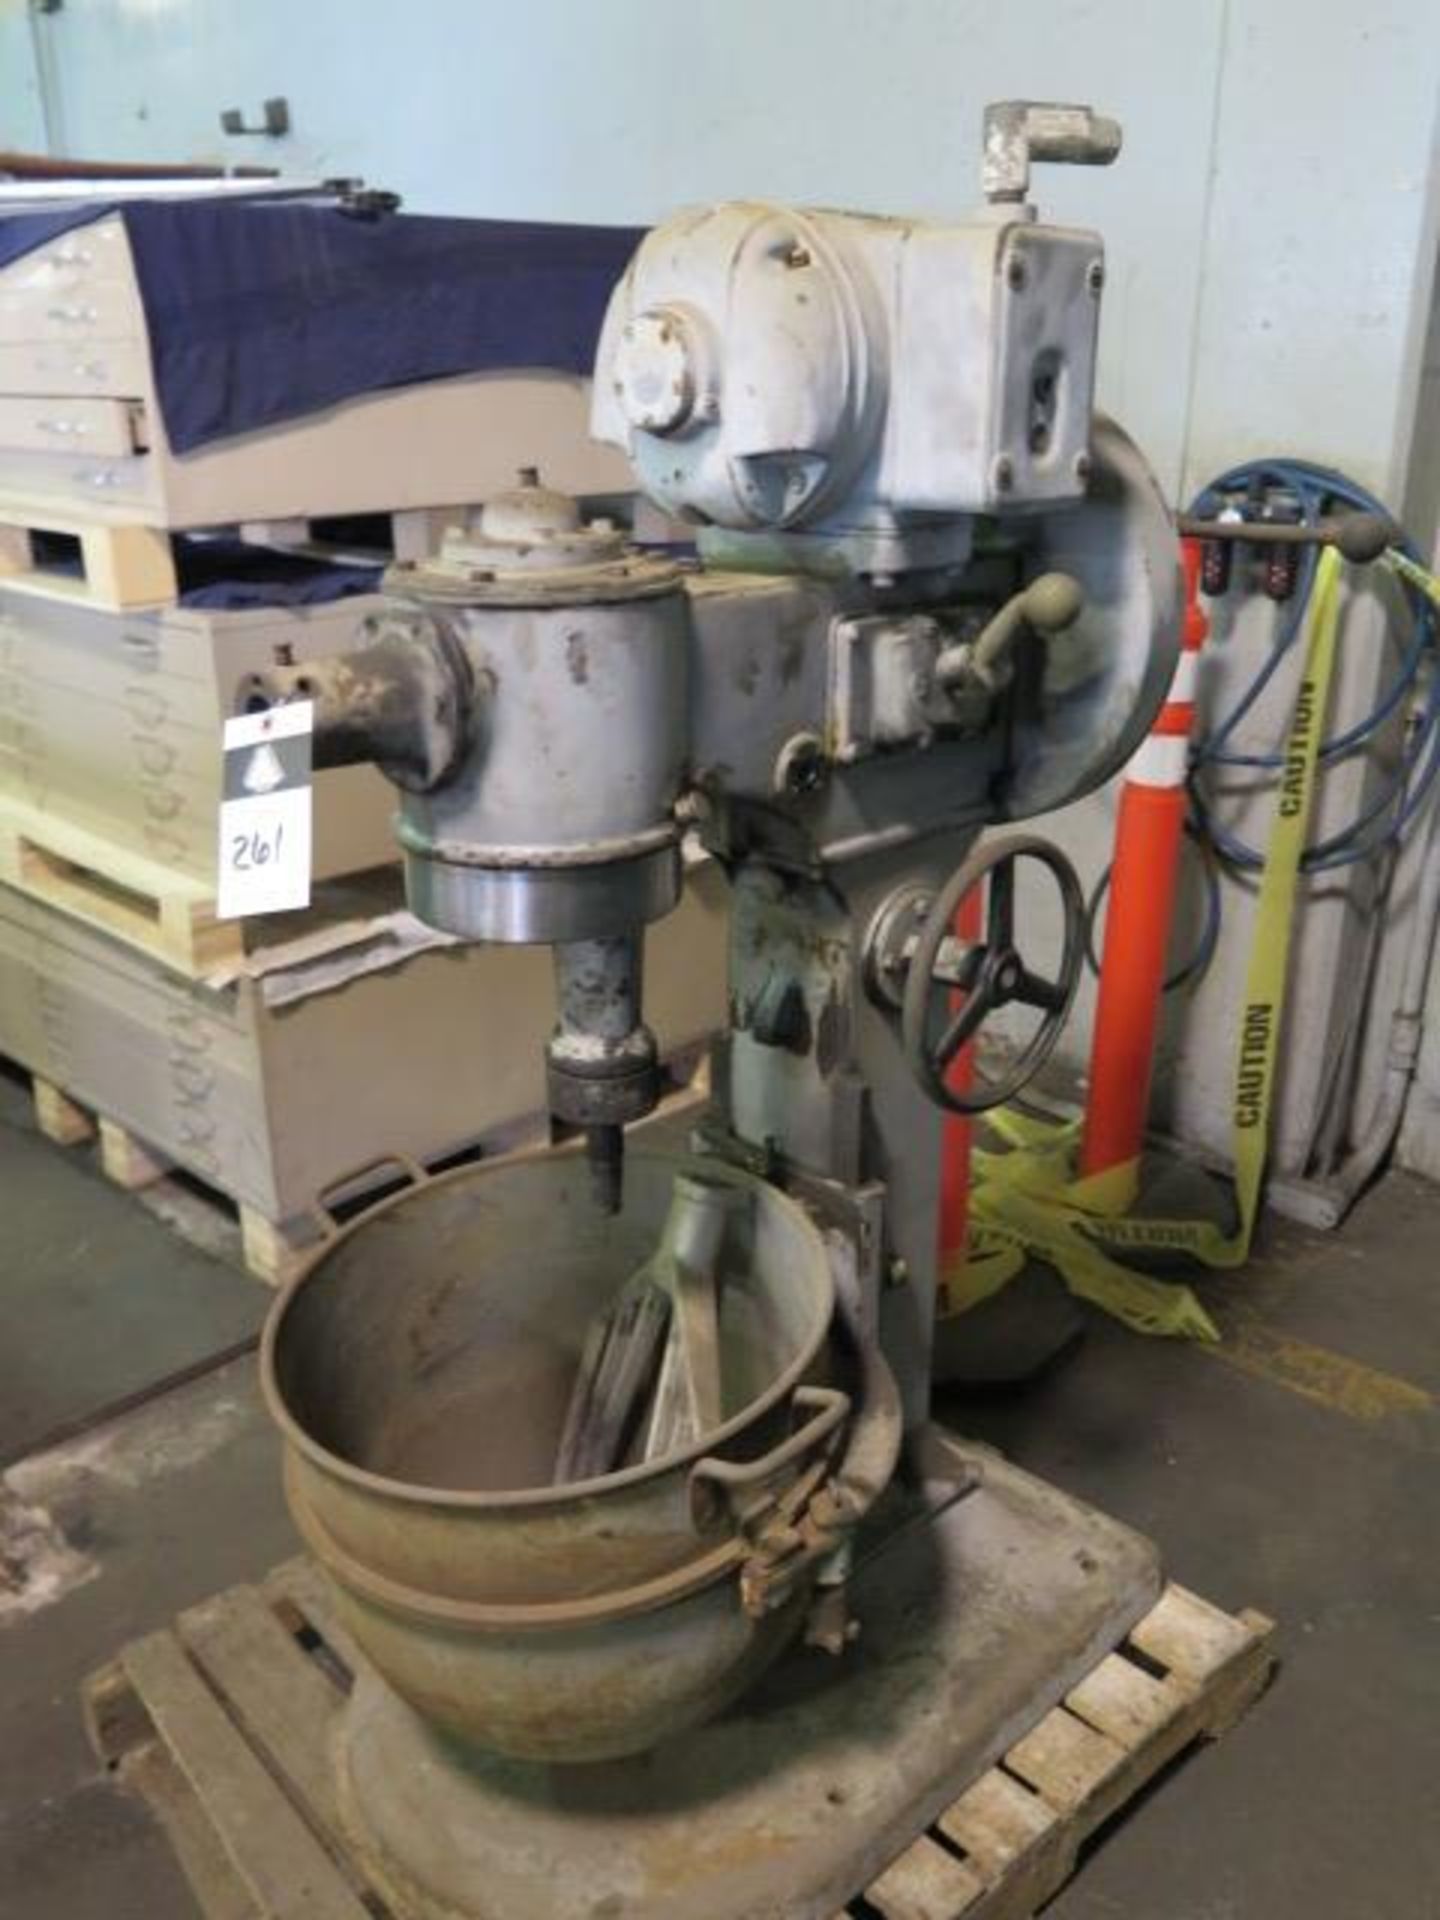 Hobart mdl. S-601 Industrial Mixer s/n 1001511 (SOLD AS-IS - NO WARRANTY) - Image 2 of 5